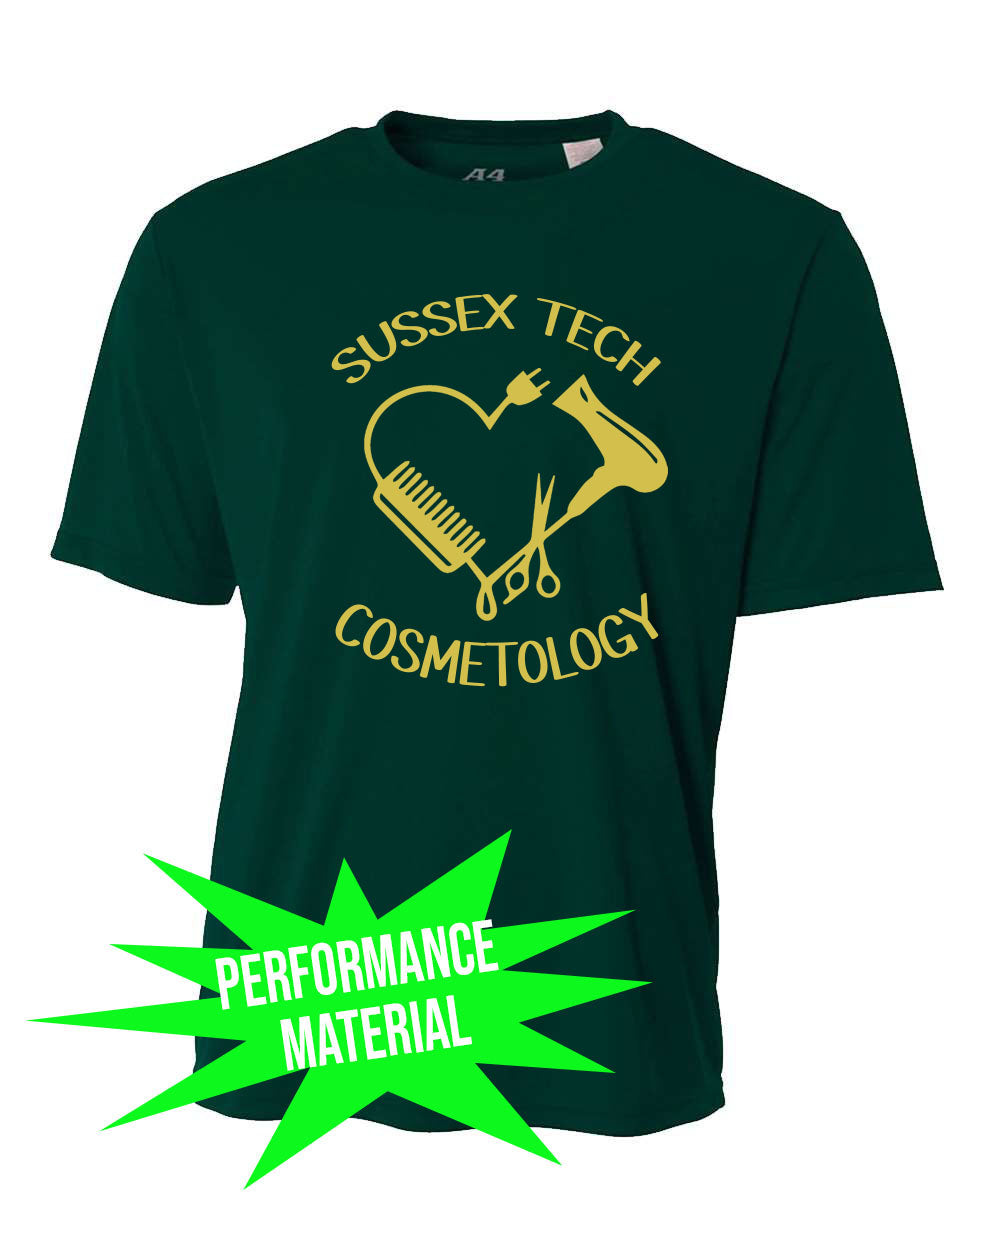 Sussex Tech Cosmetology Performance Material design 2 T-Shirt